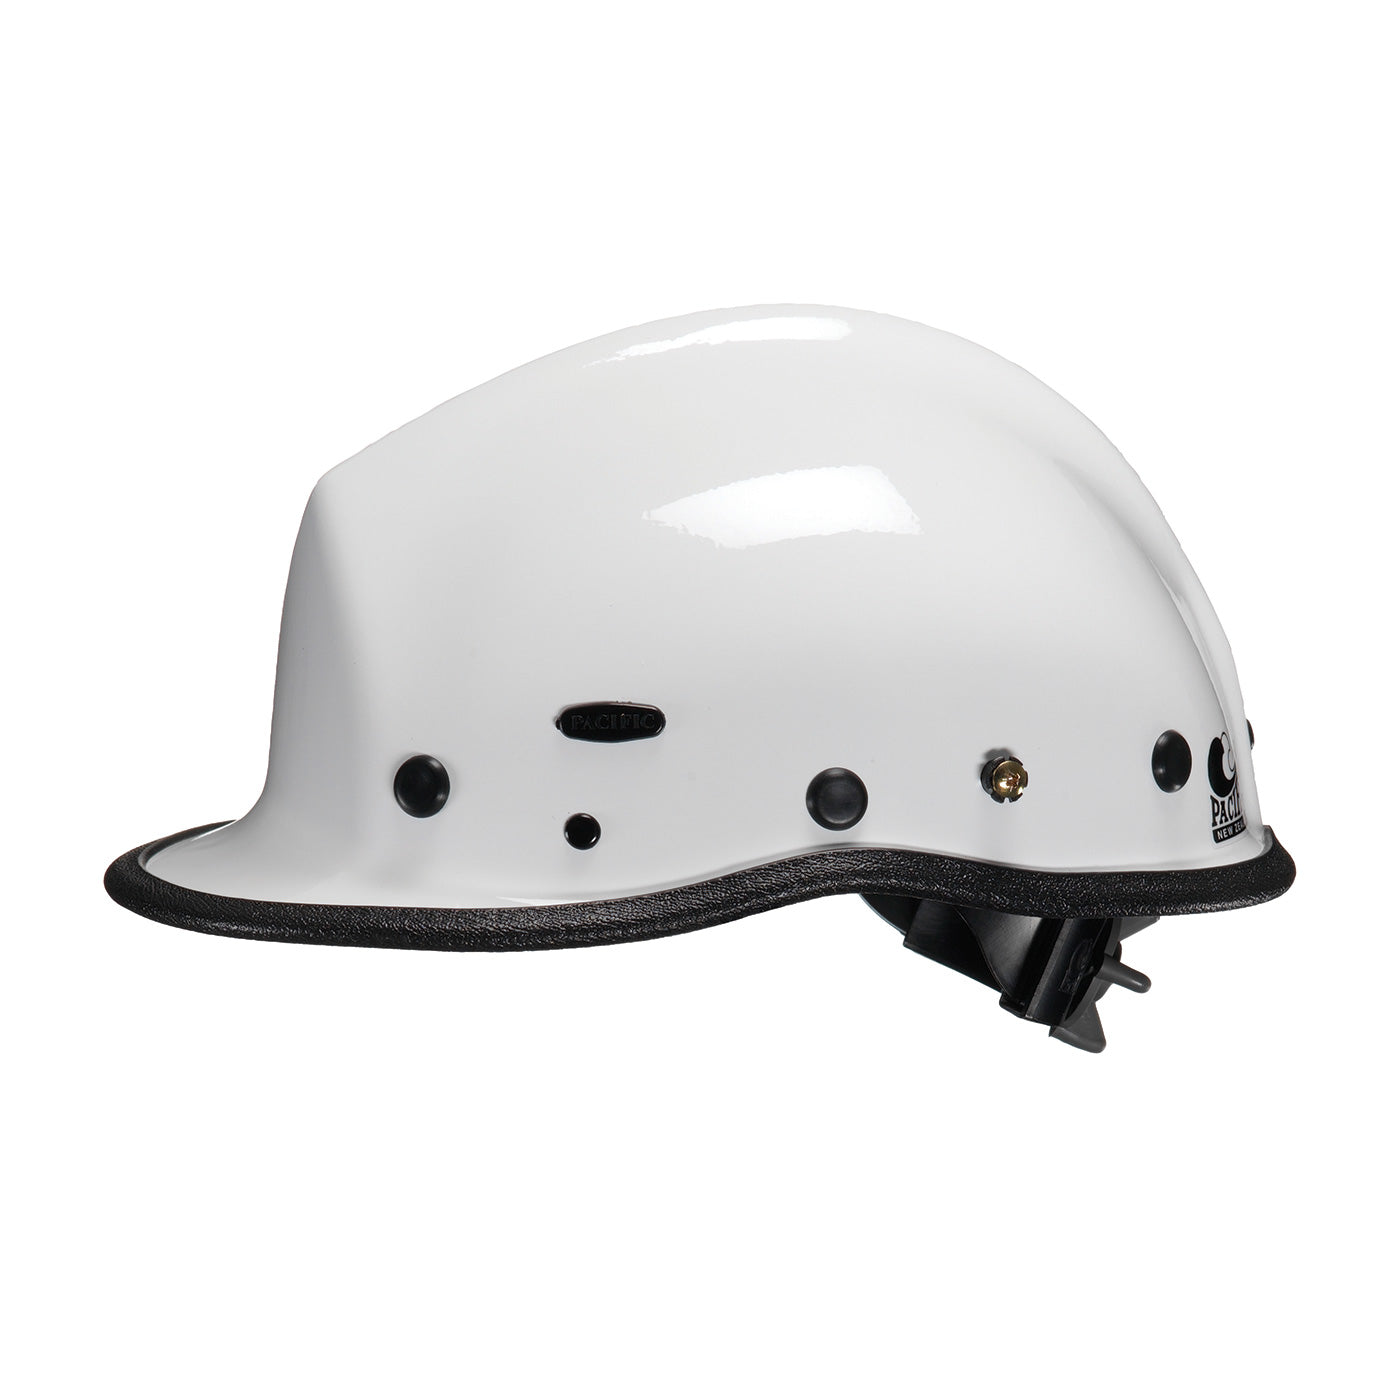 Protective Industrial Products-PACIFIC R5SL RESCUE HELMET-eSafety Supplies, Inc